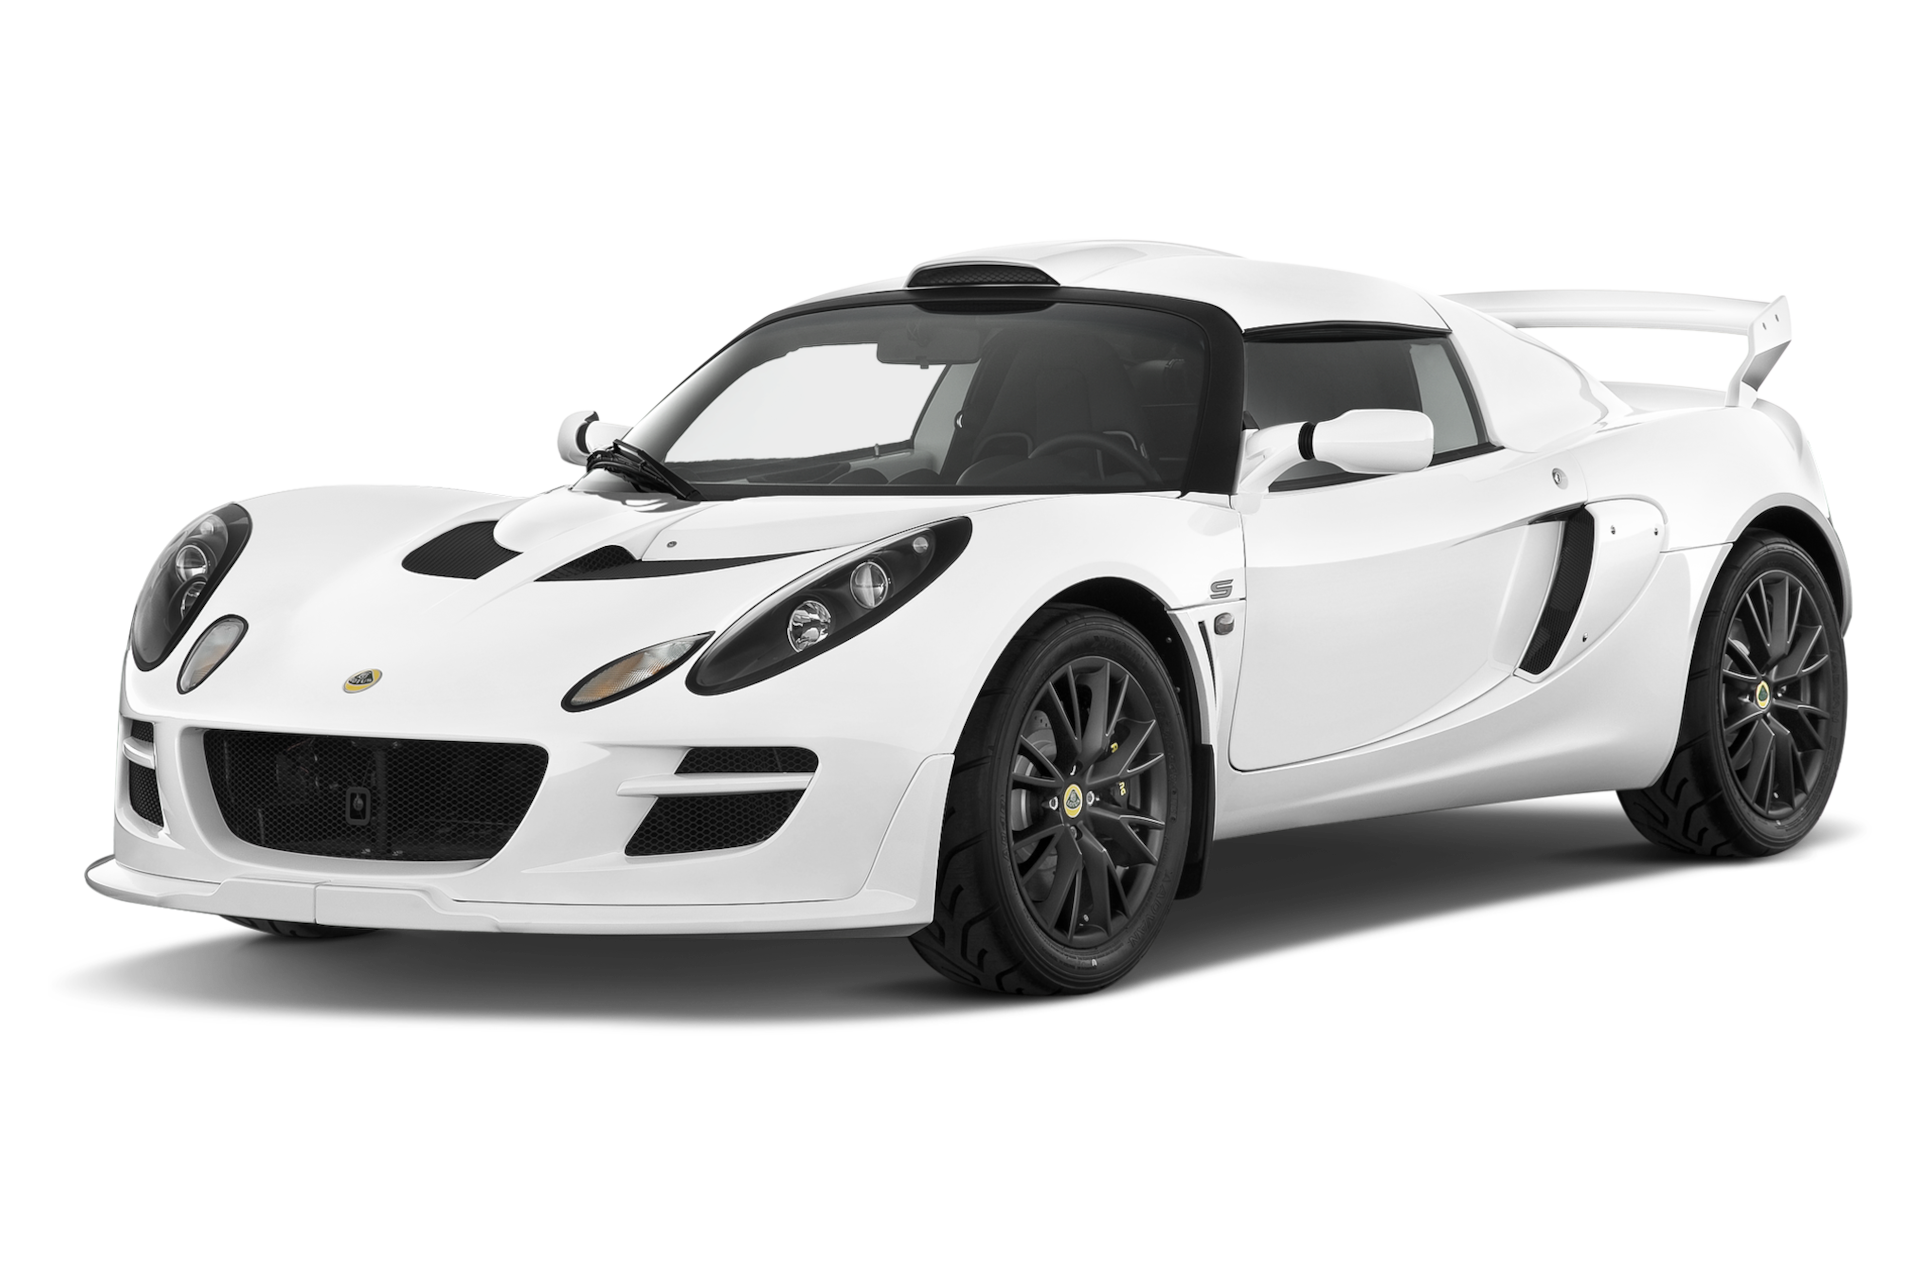 2010 Lotus Exige Prices, Reviews, and Photos - MotorTrend